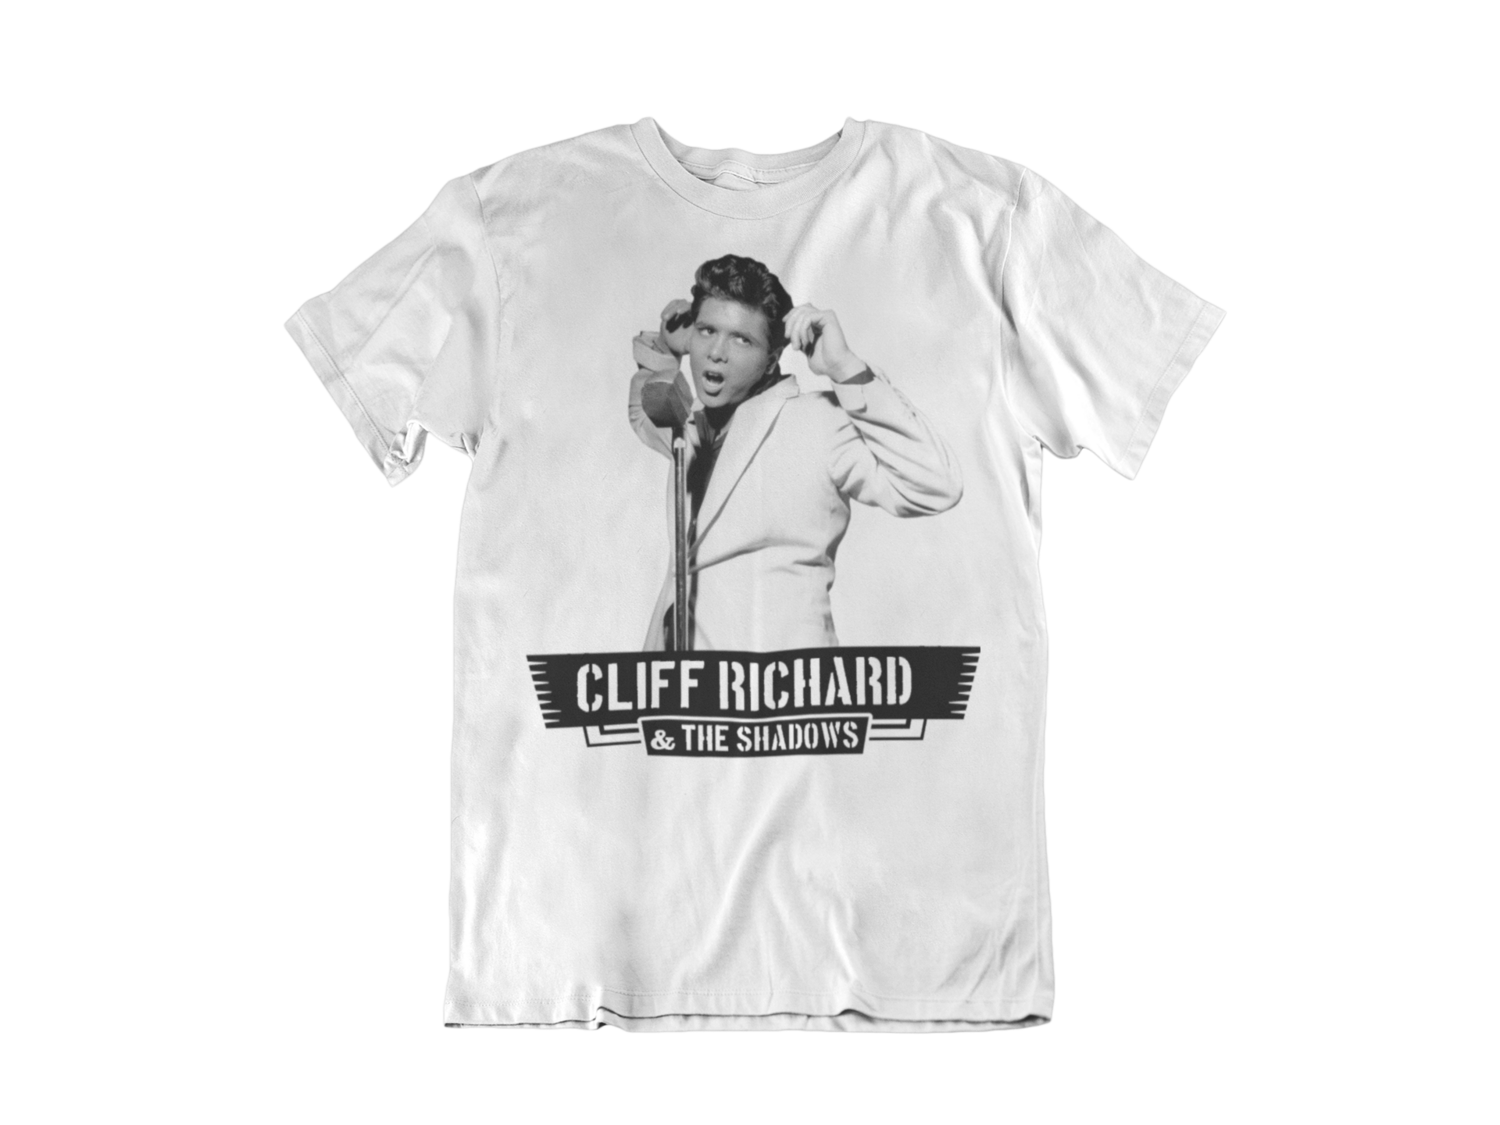 CLIFF RICHARD AND THE SHADOWS T-SHIRT FOR MEN